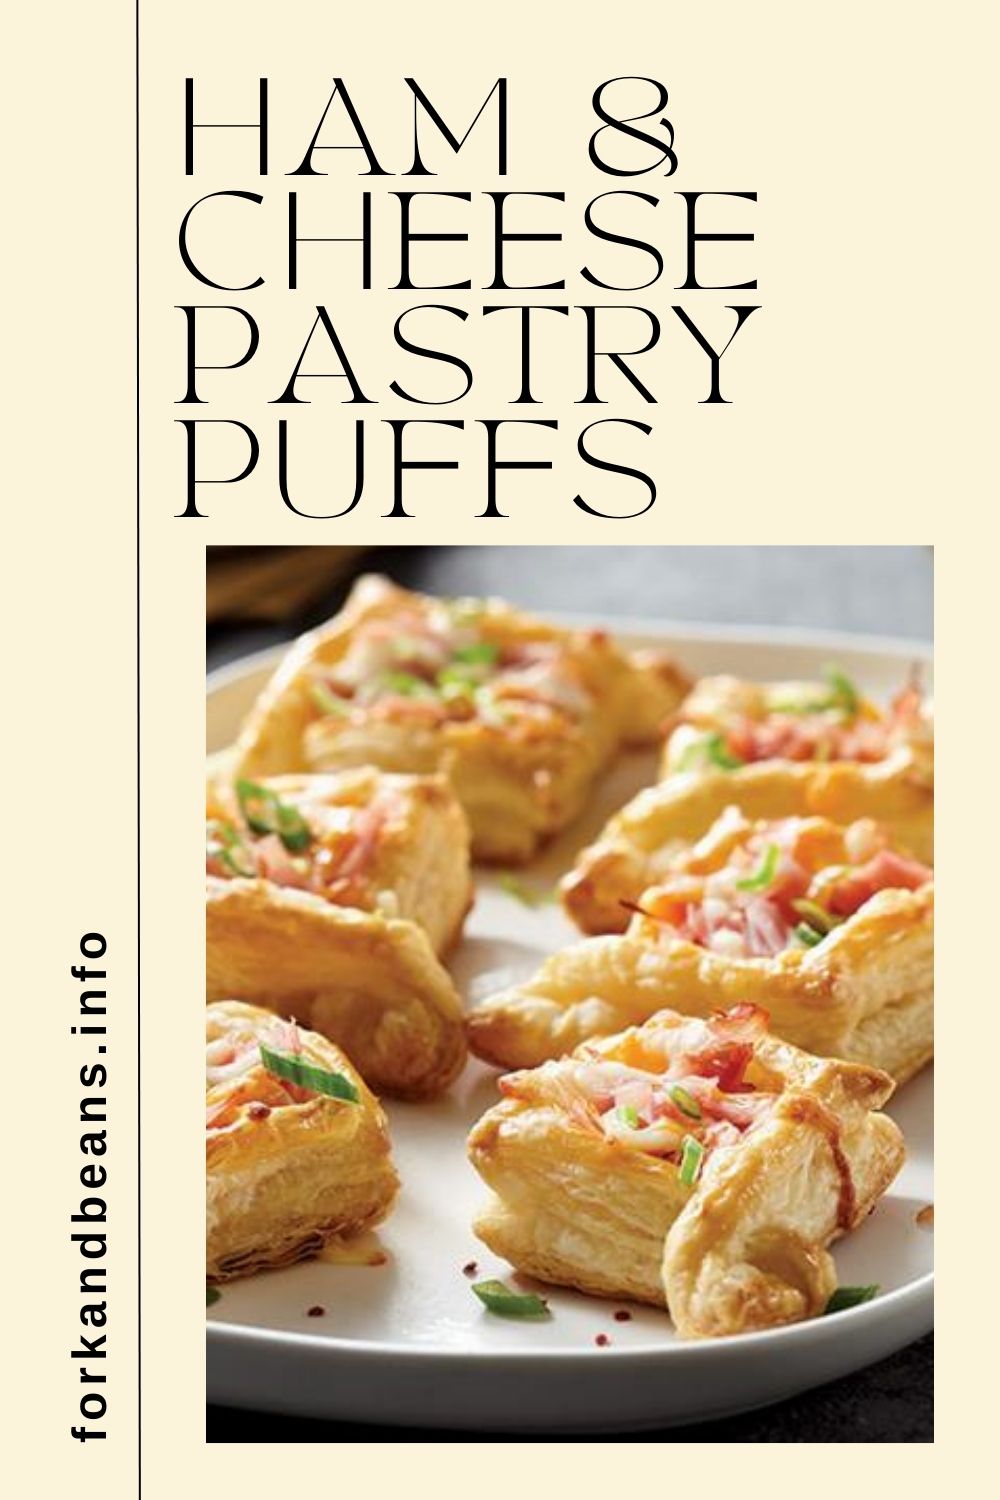 Puff Pastry with Ham and Cheese